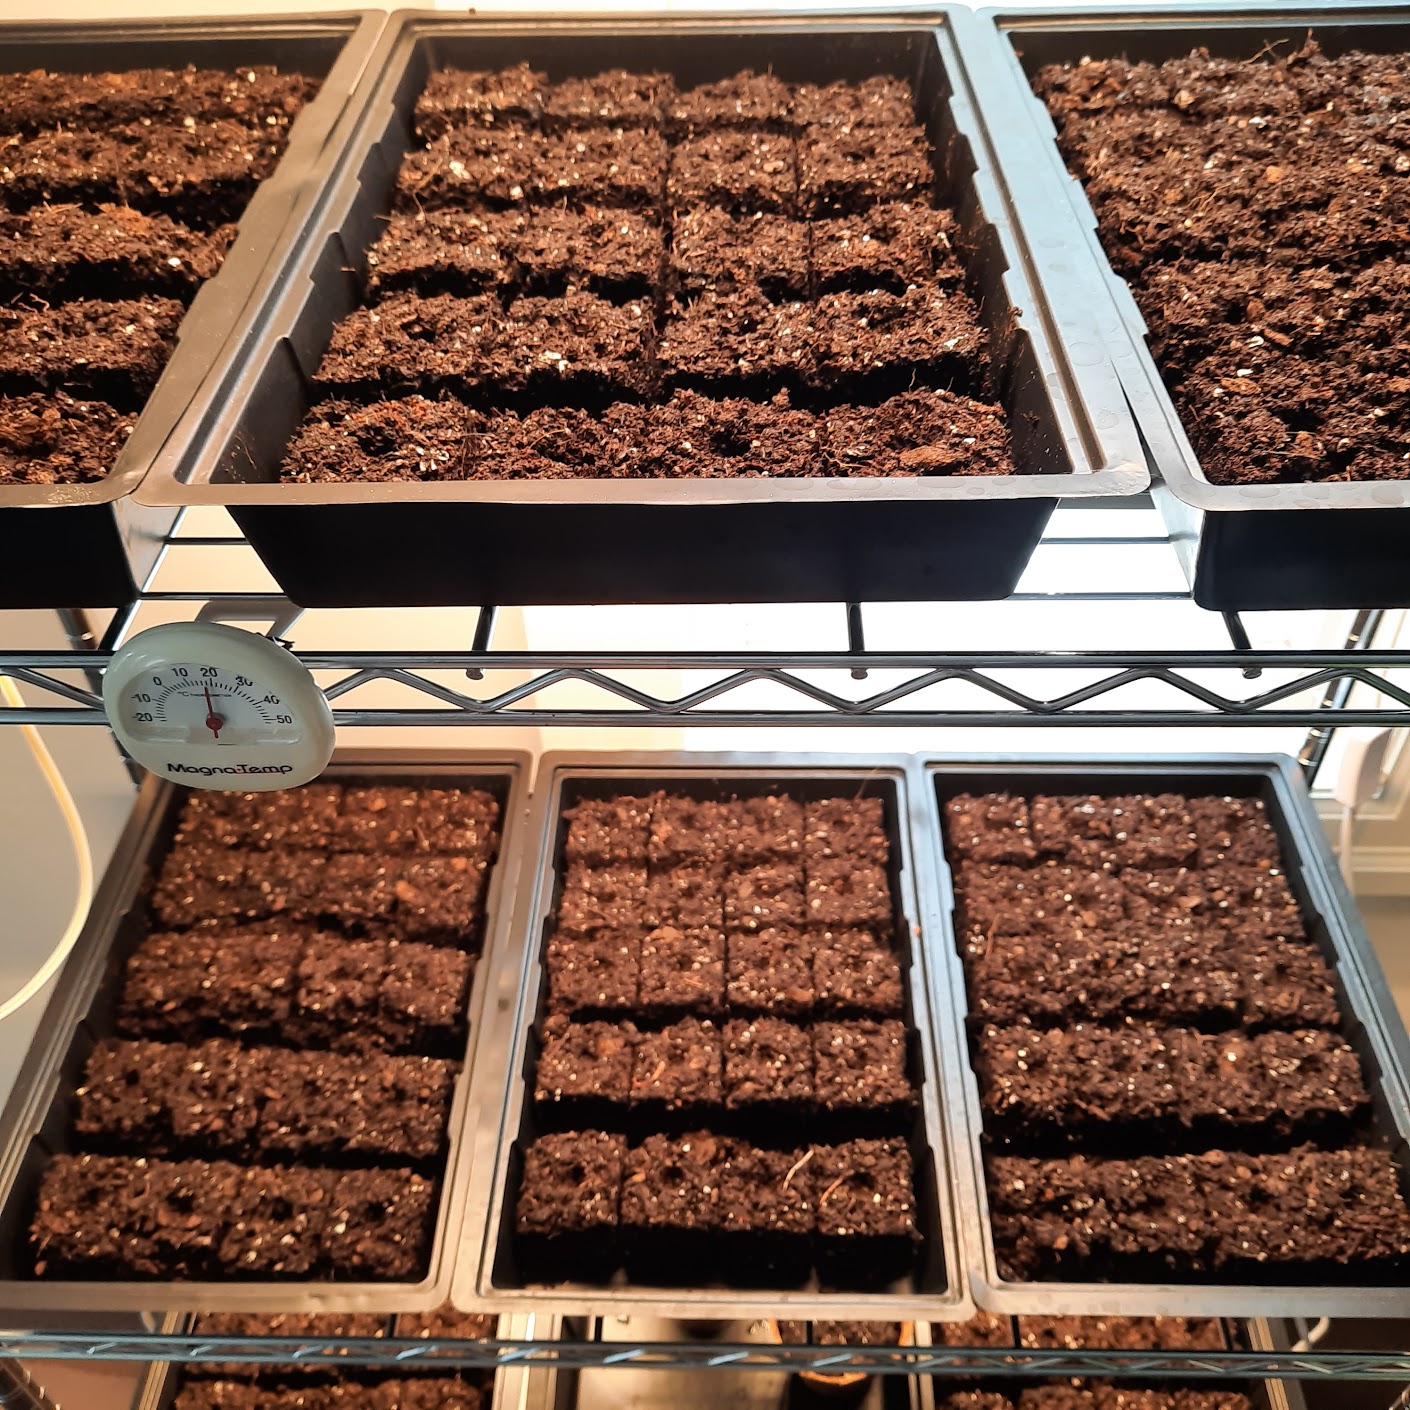 Pictured are two shelves lit brightly from behind/above, each filled with trays filled with soil blocks.